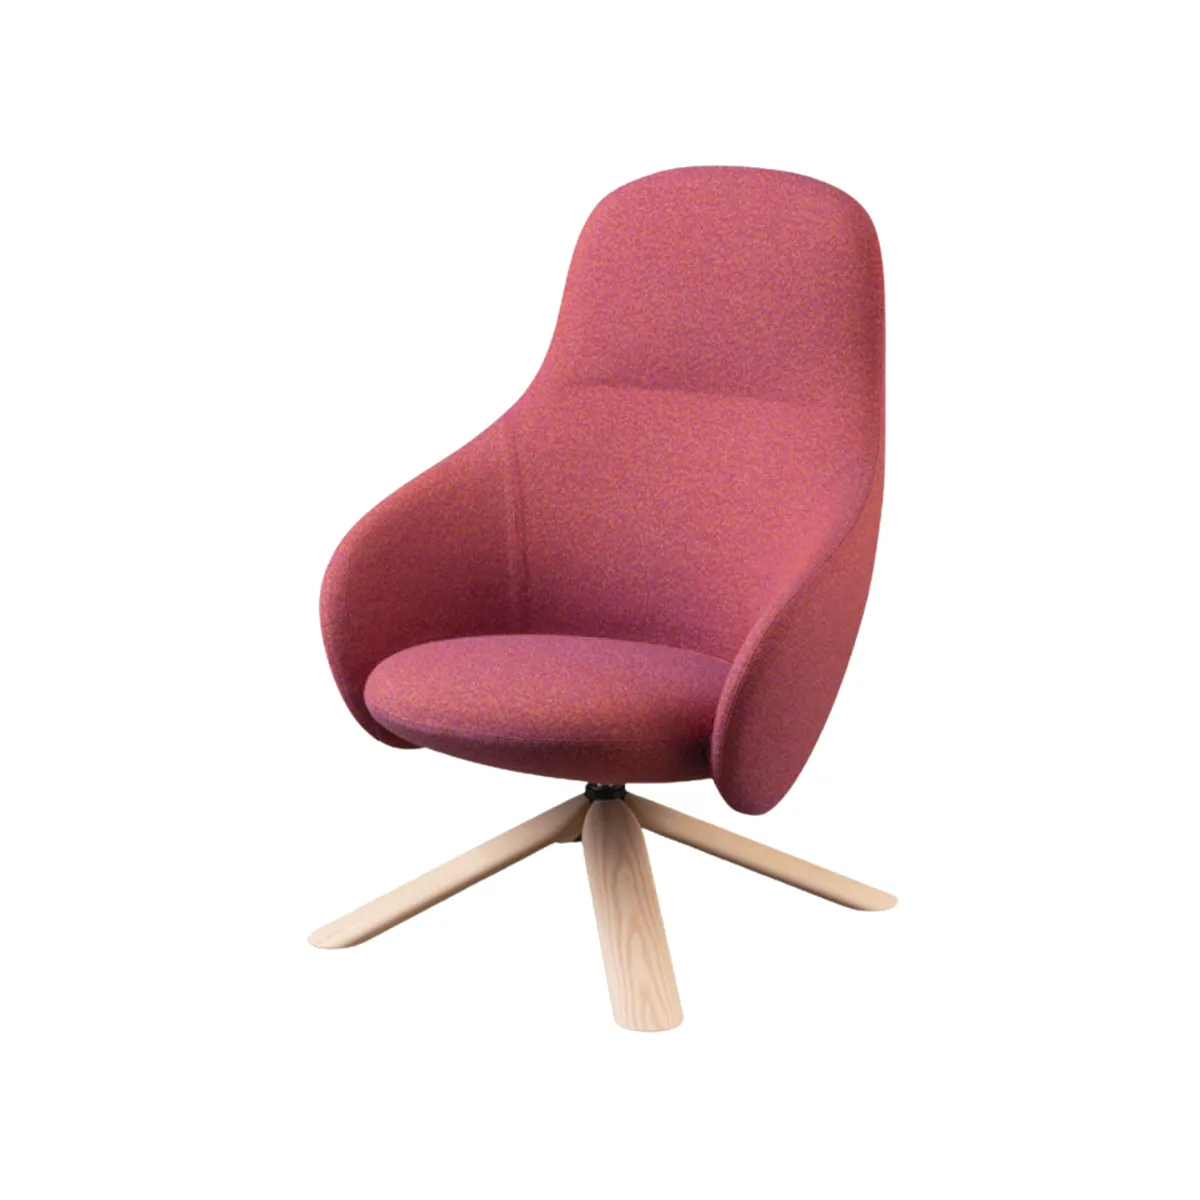 Nelly wood lounge chair 1